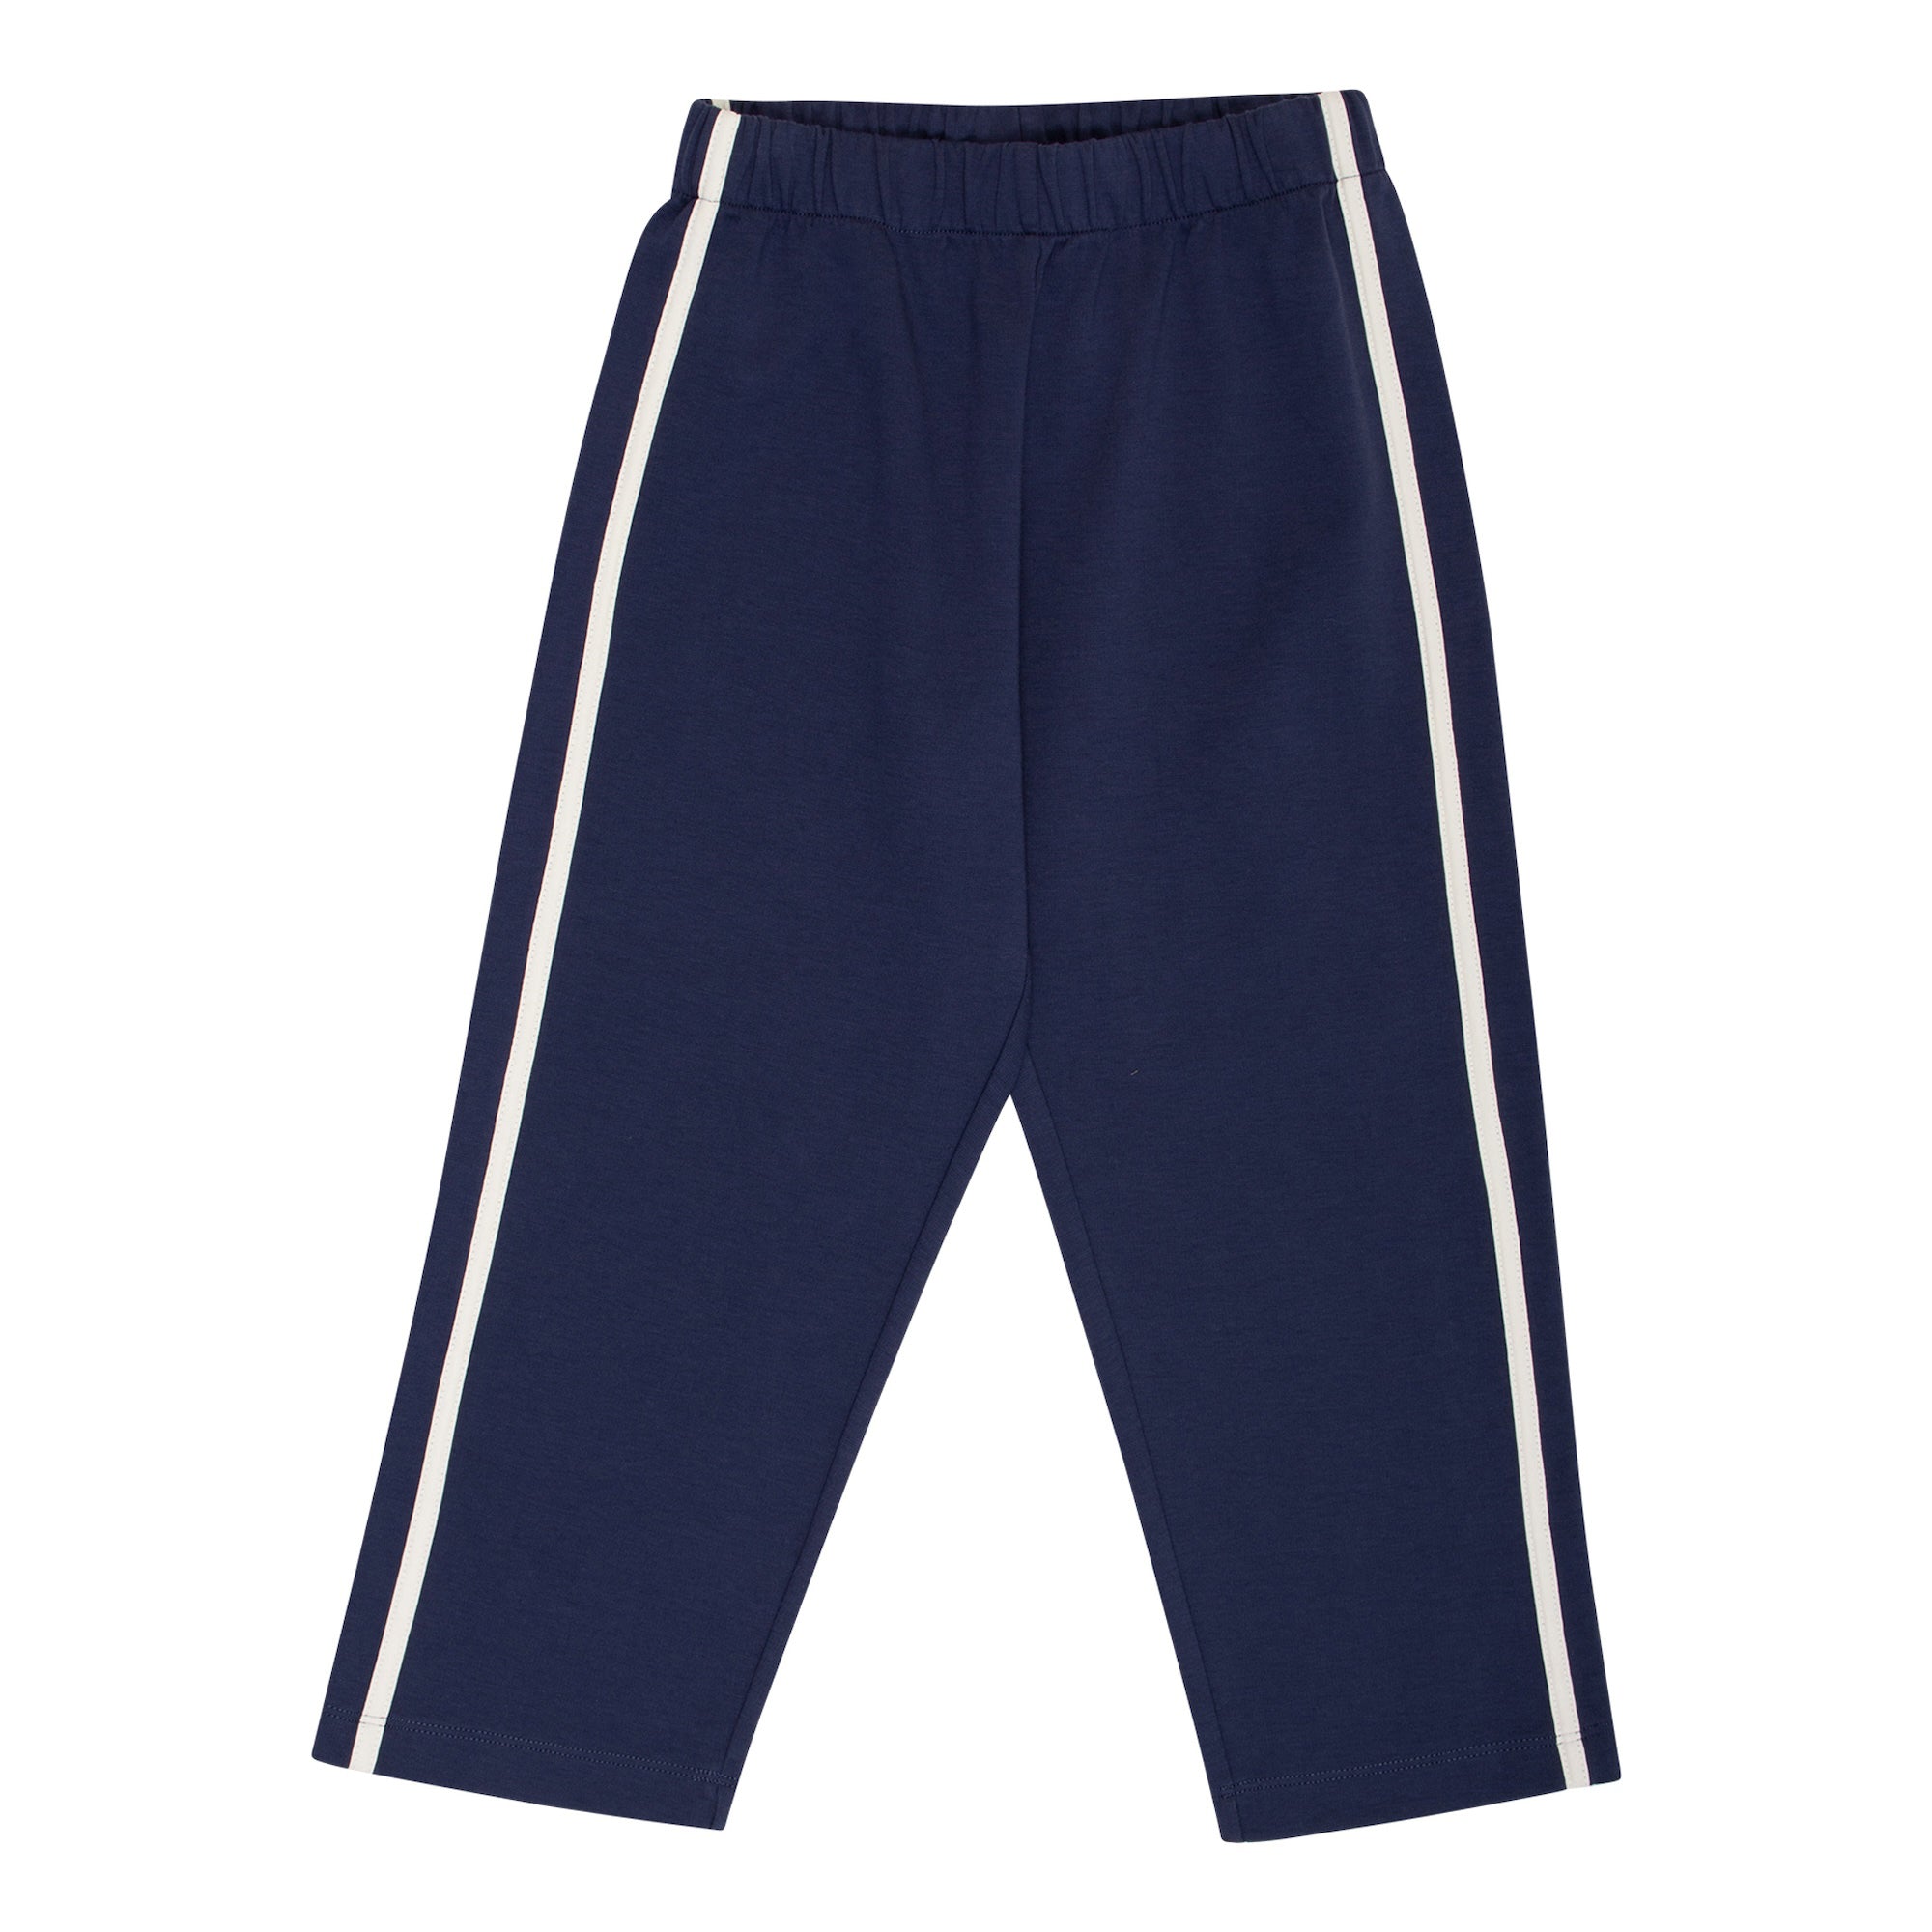 Double You Sweat Pant - Navy